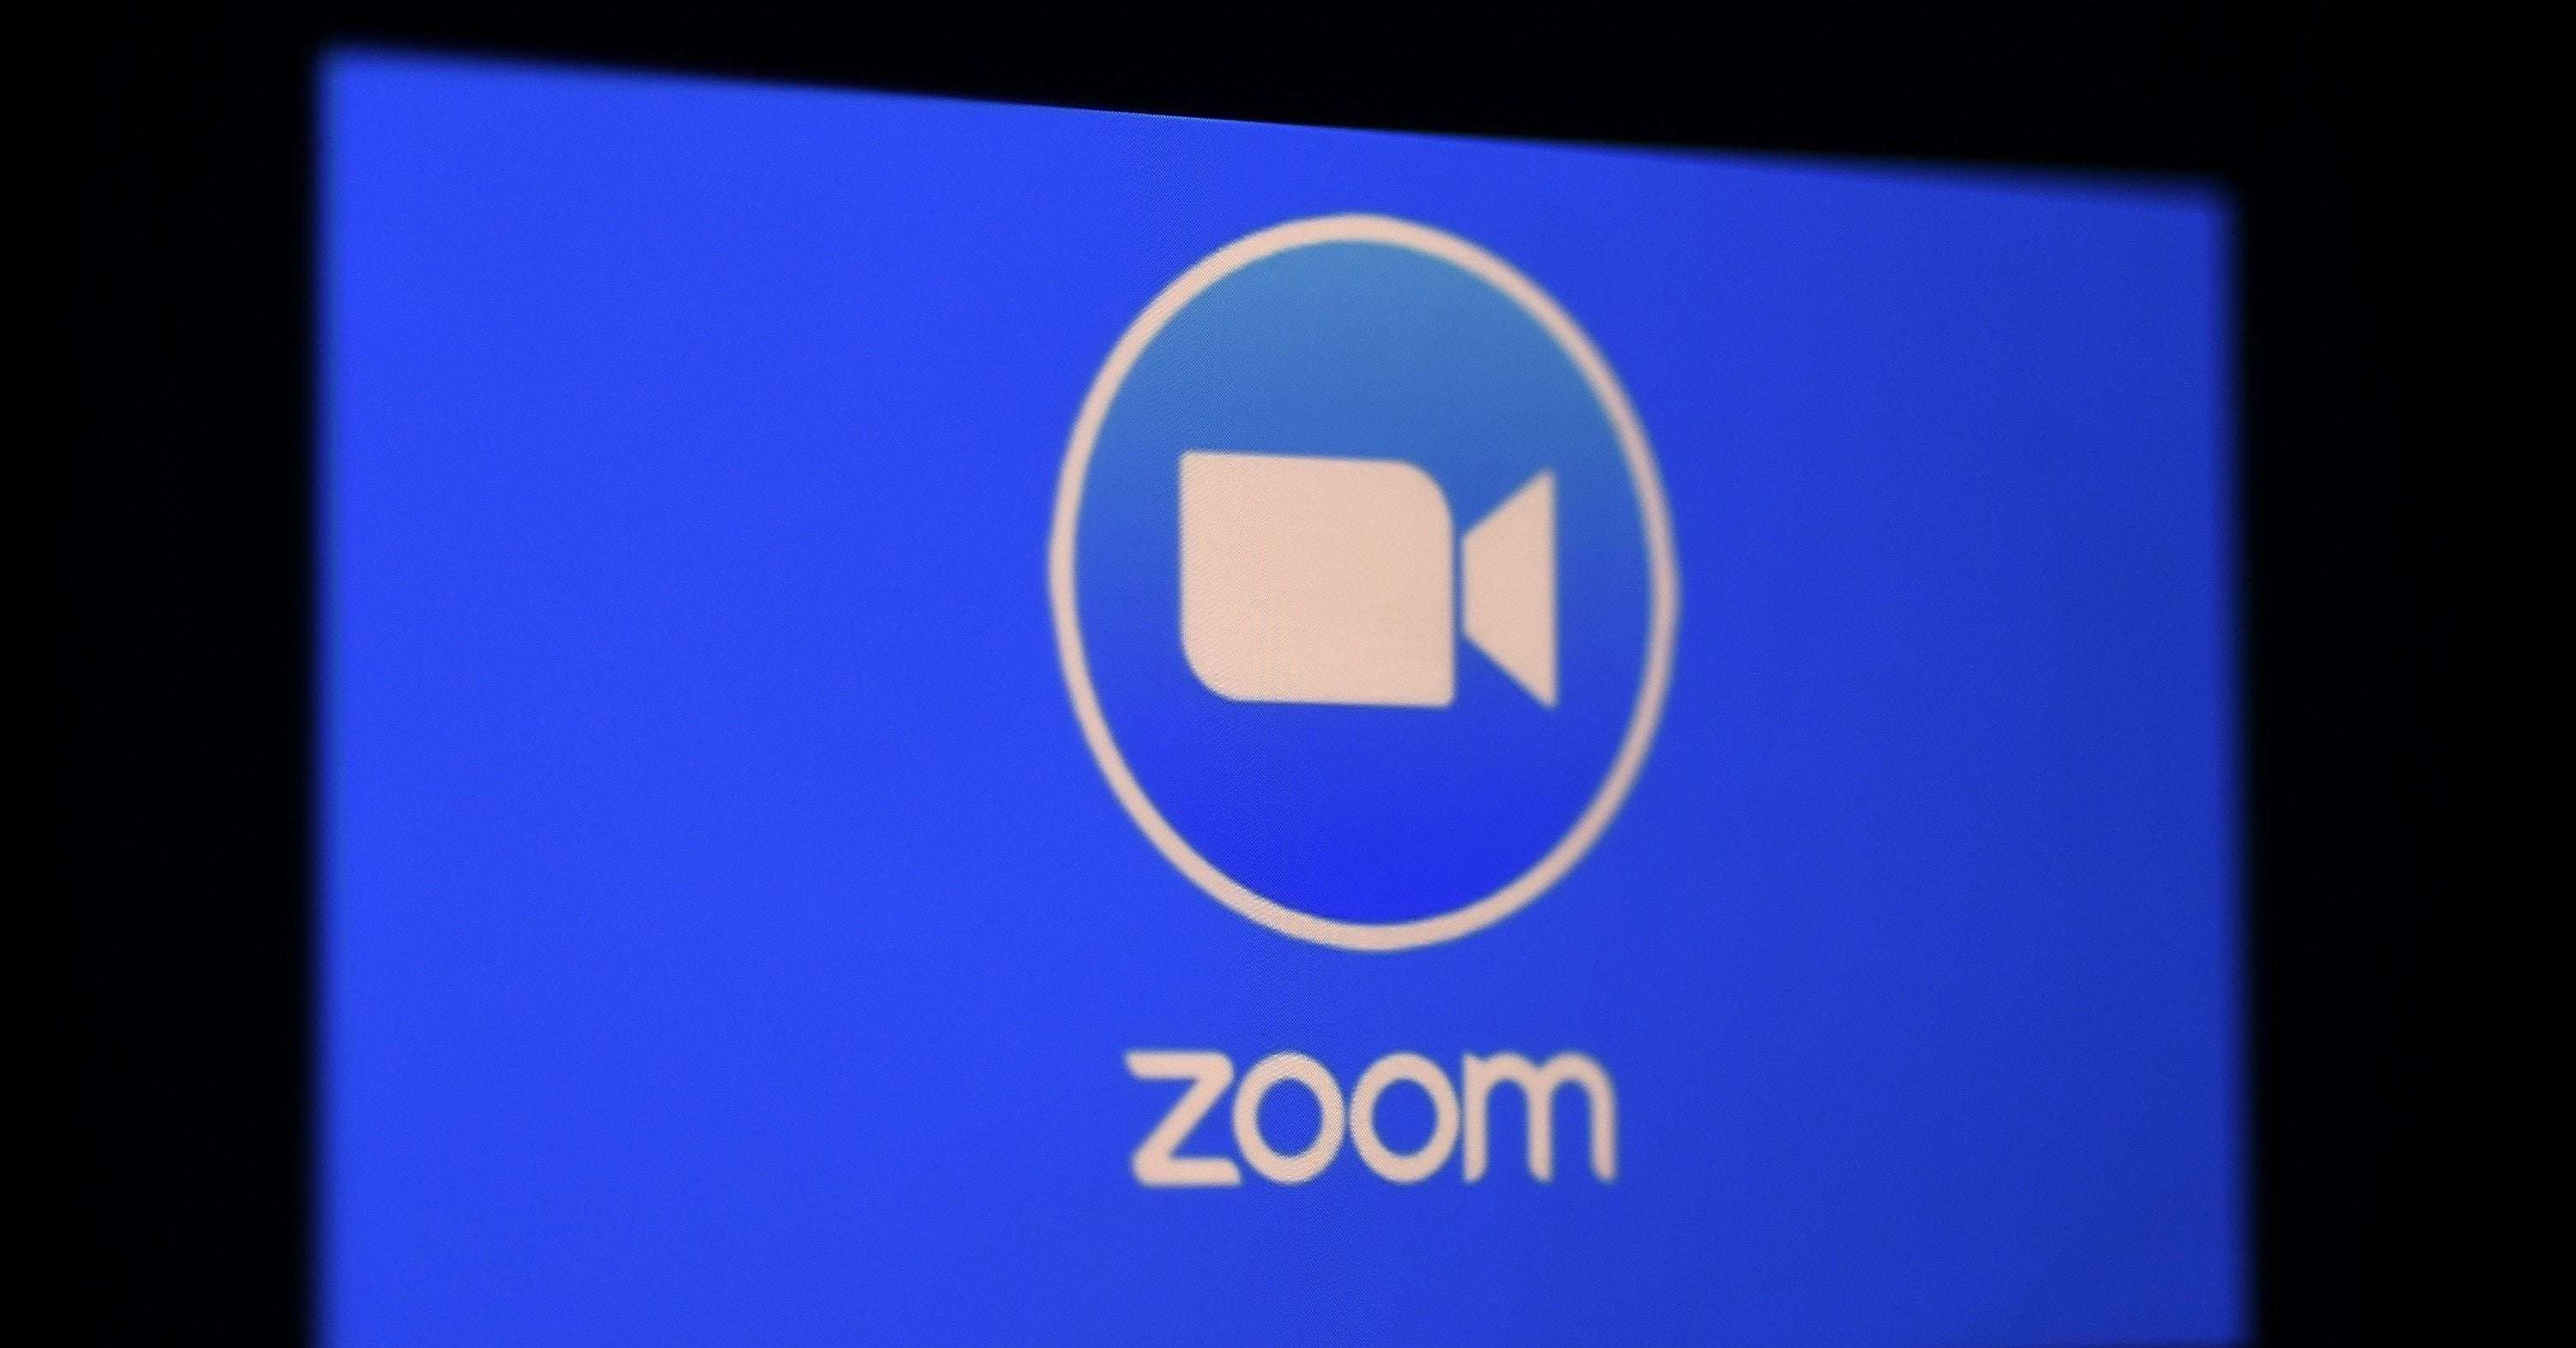 image for Zoom Deleted Events Discussing Zoom “Censorship”